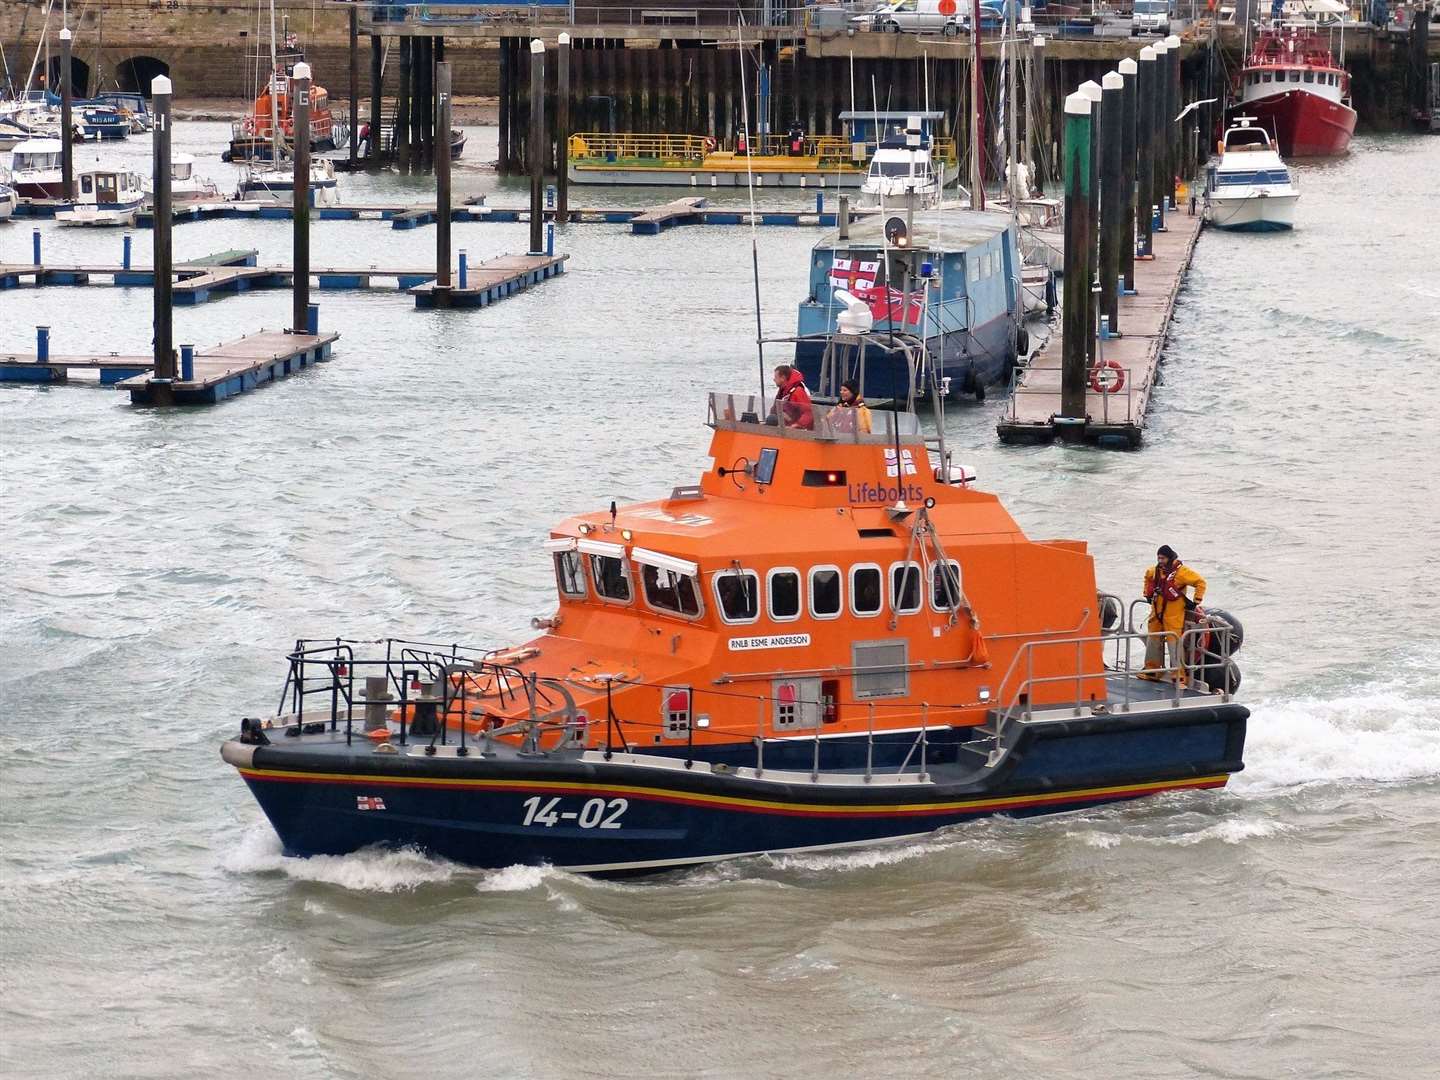 The Ramsgate lifeboat Esme Anderson was called out to the rescue. Picture: Ramsgate RNLI (12879023)